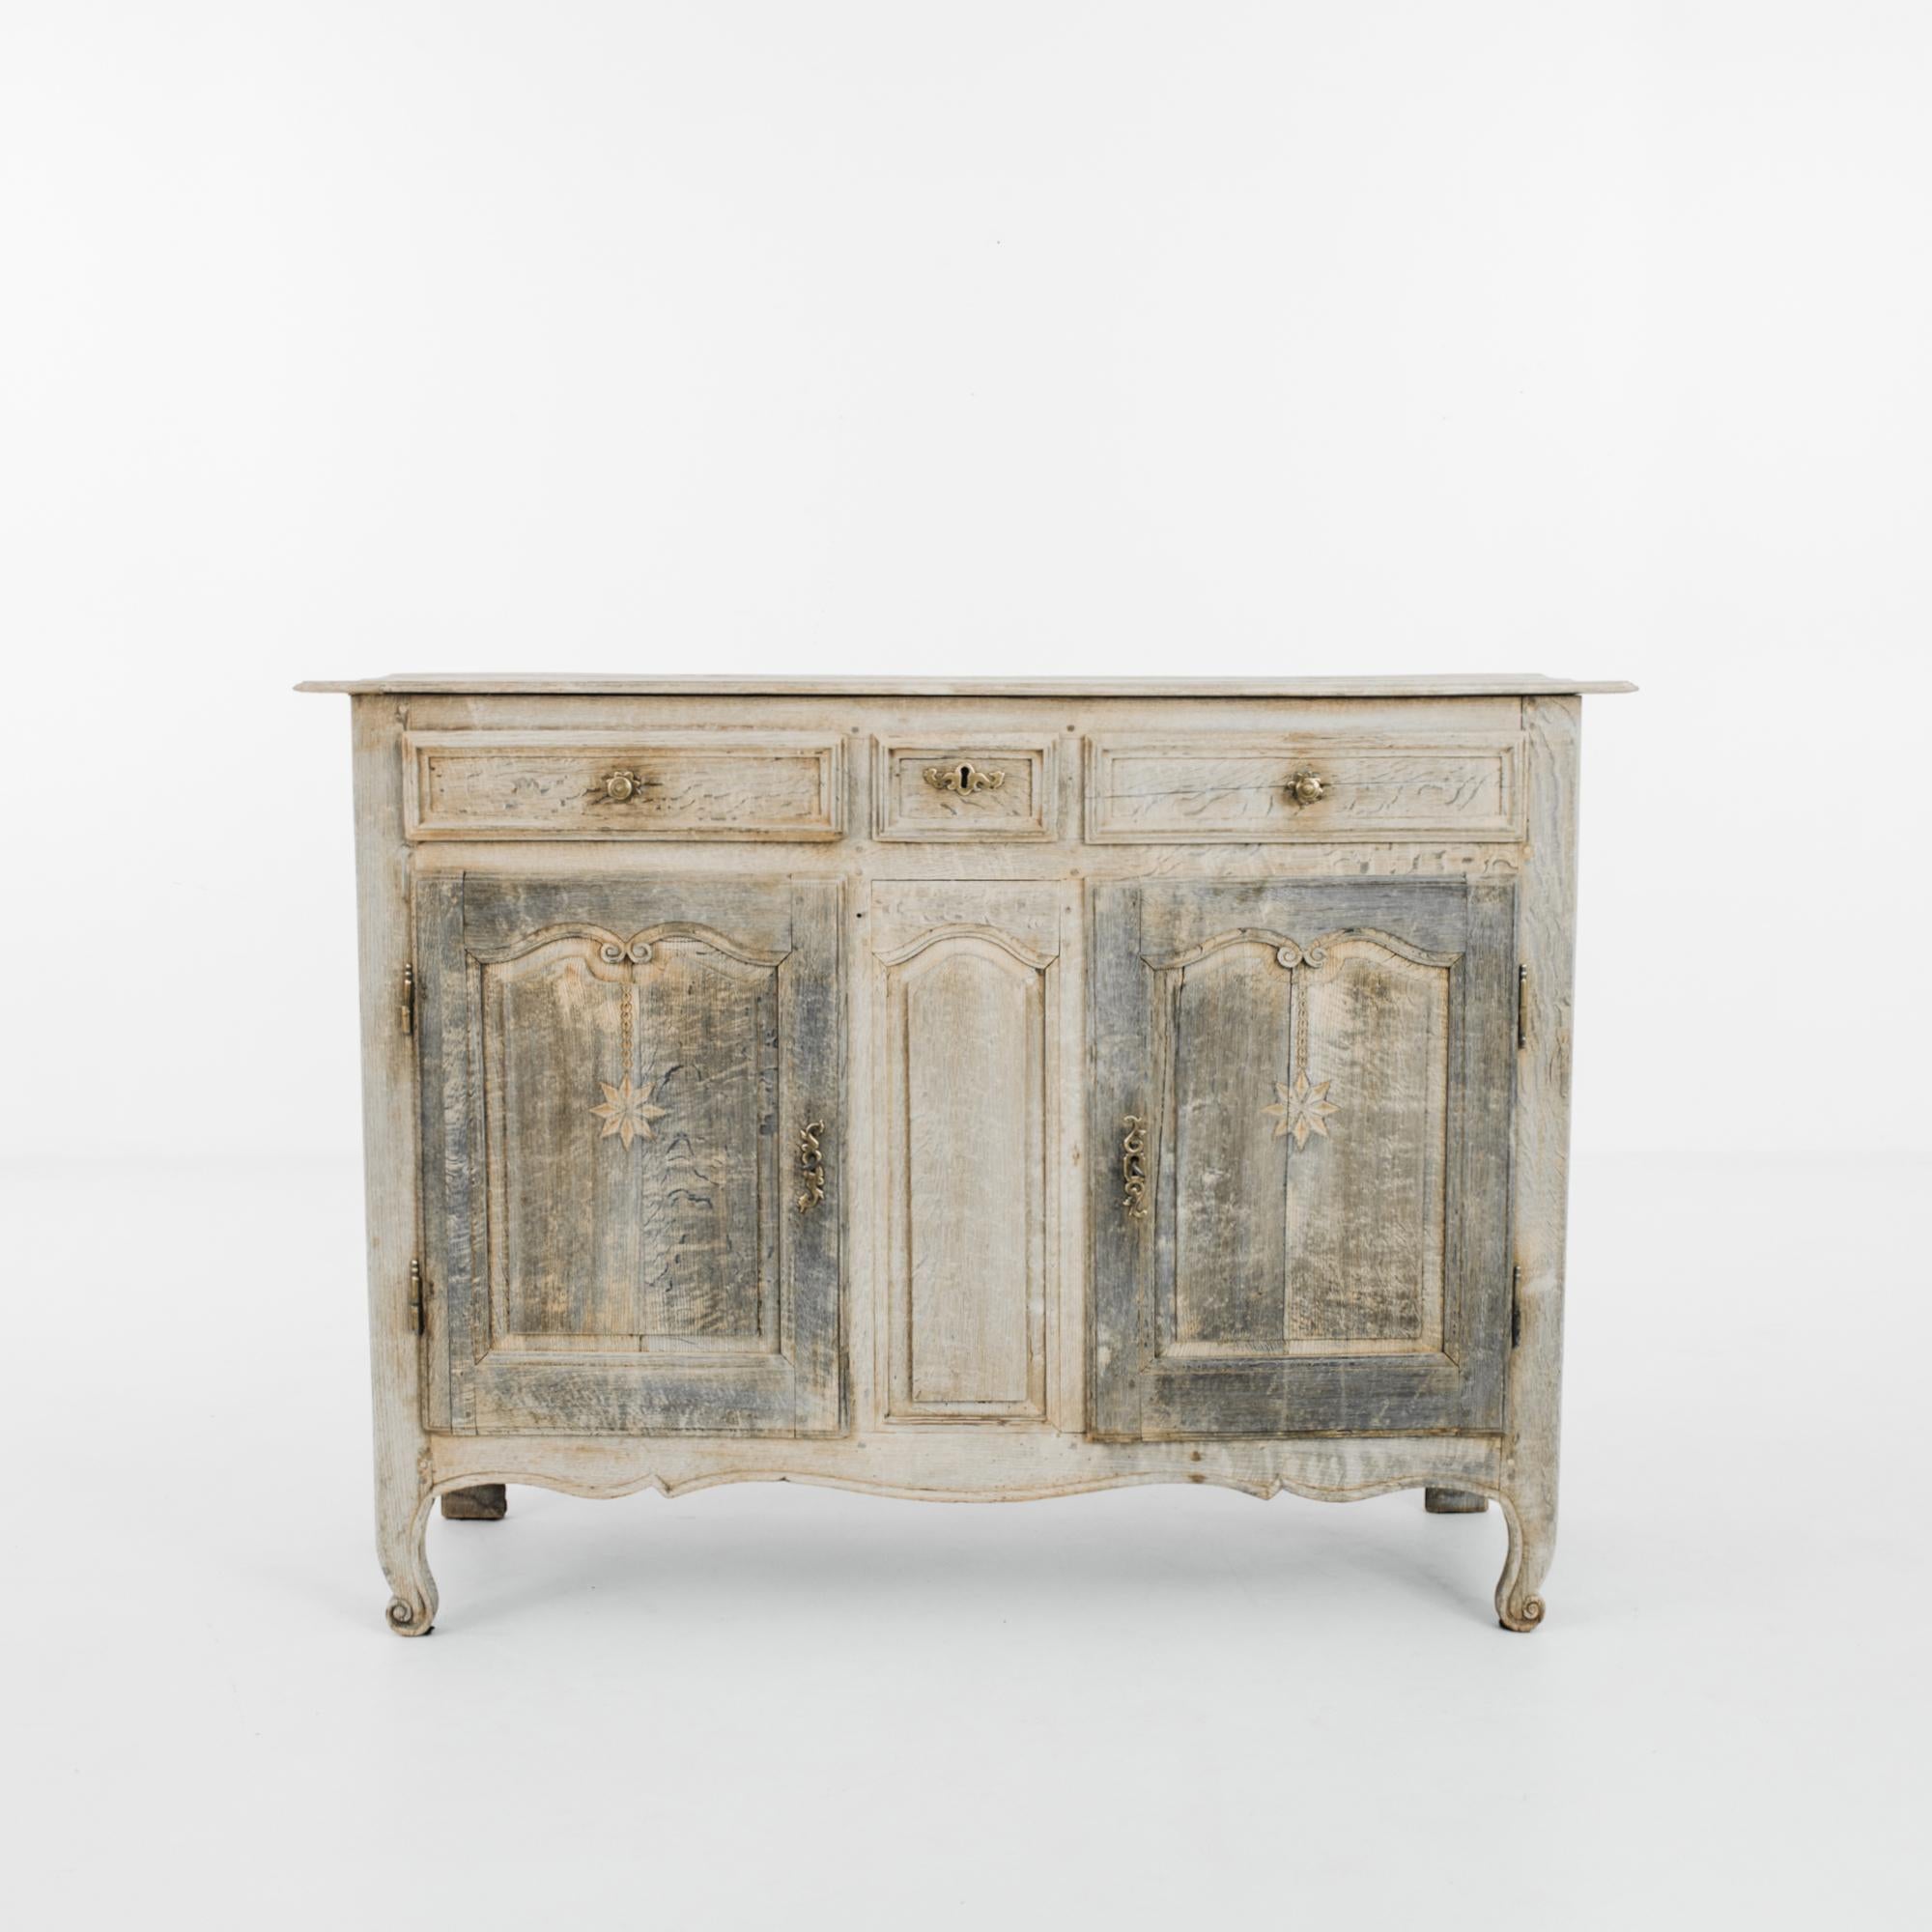 This bleached oak buffet with a scalloped apron was made in France, circa 1820. It houses three drawers, and lockable doors below open to reveal two shelves. The paneling is carved with dangling eight-point stars and adorned with scrolled arcs,